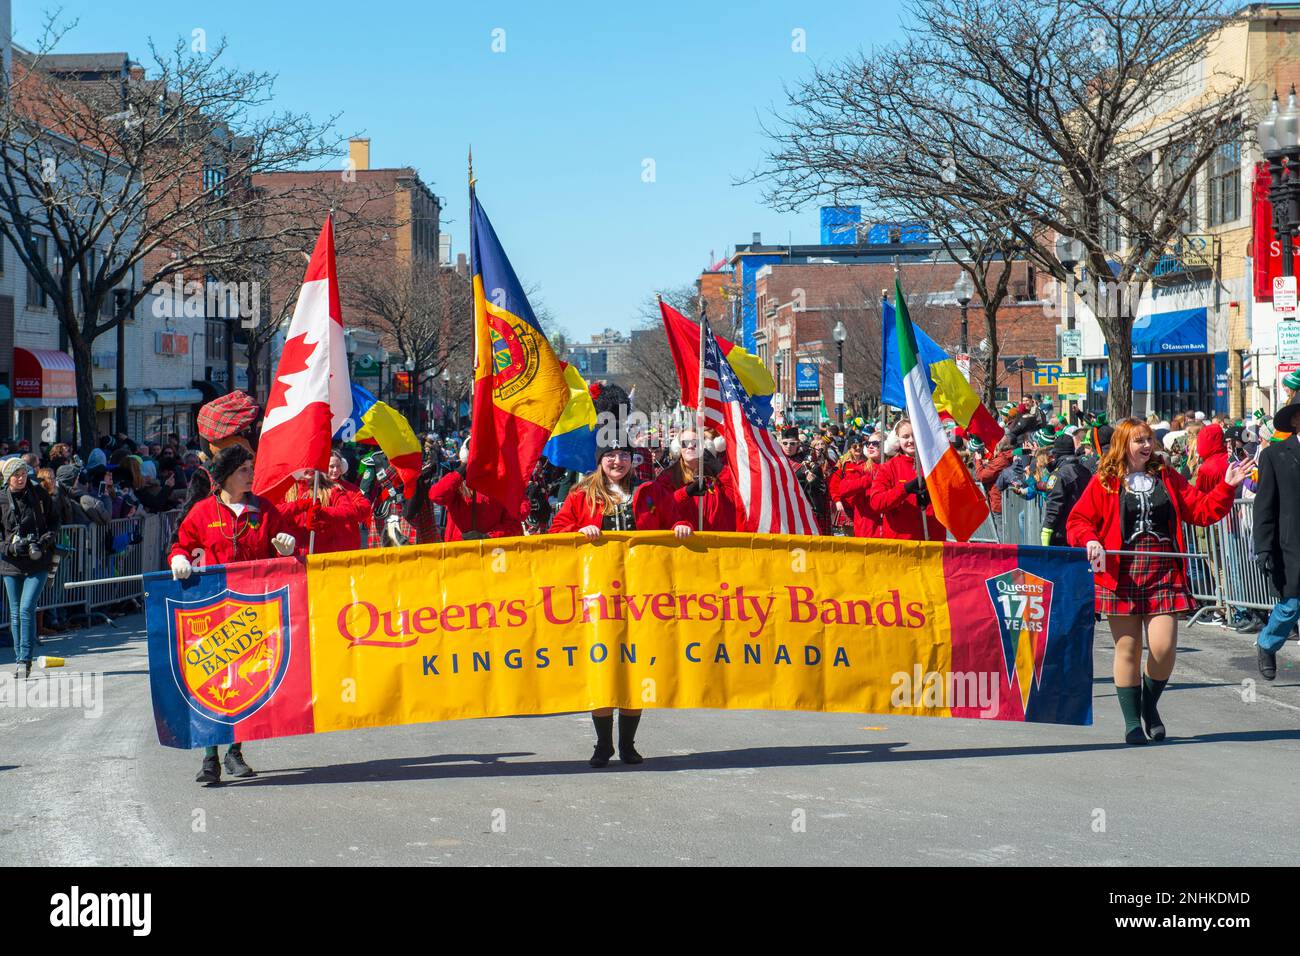 Queen's University Bands March on 2018 Saint Patrick's Day Parade in Boston, Massachusetts MA, USA. Stock Photo